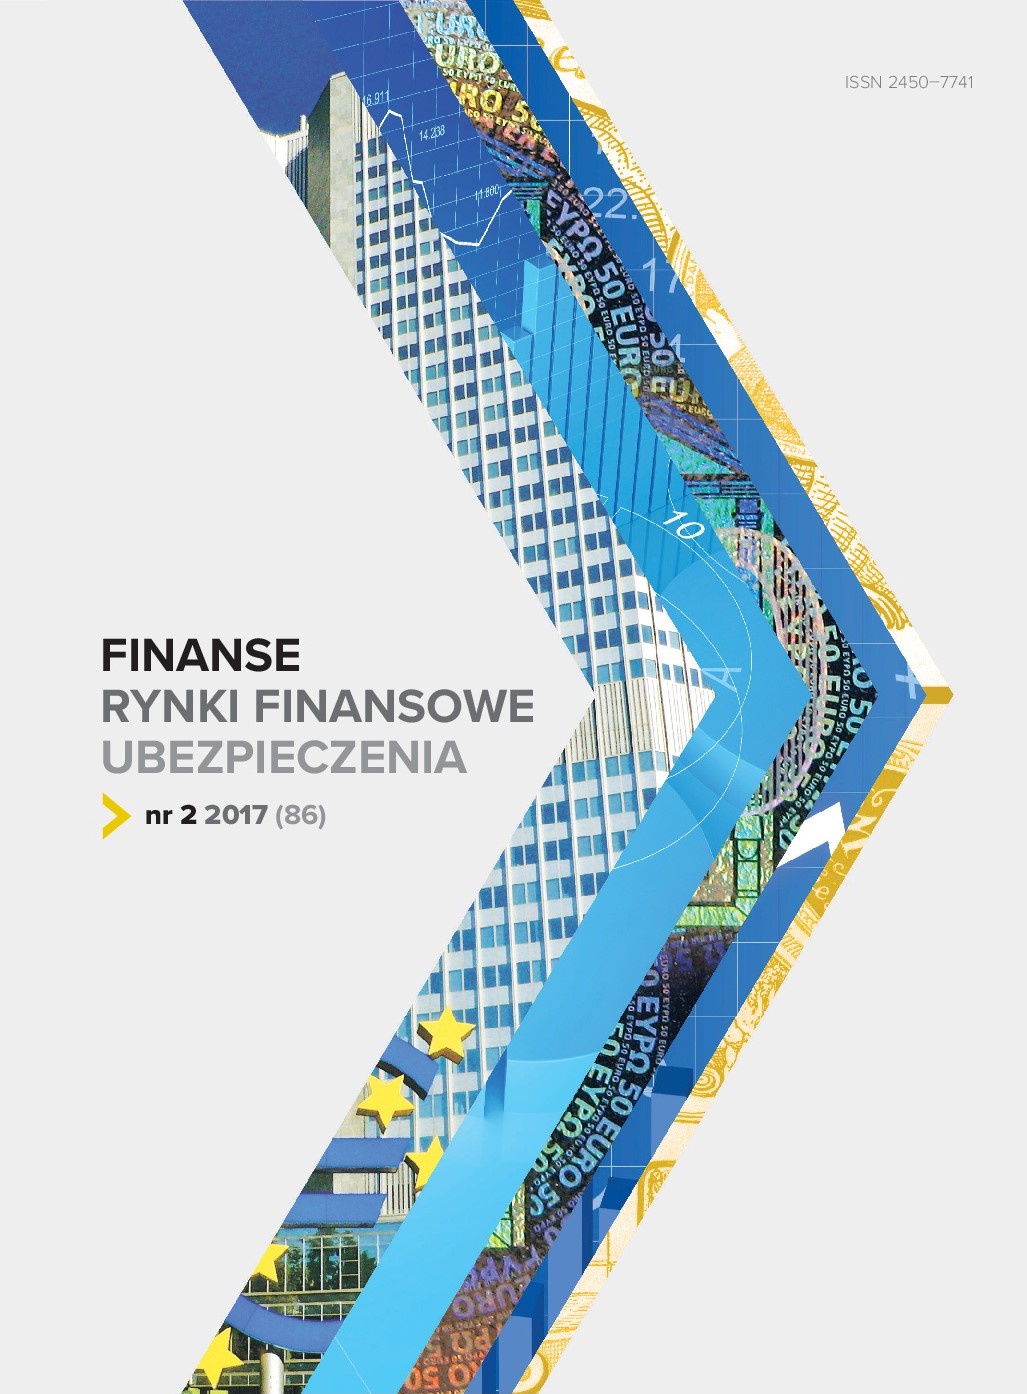 The End-closed Funds Puzzle, for Example Selected FIZ on the Polish Capital Market Cover Image